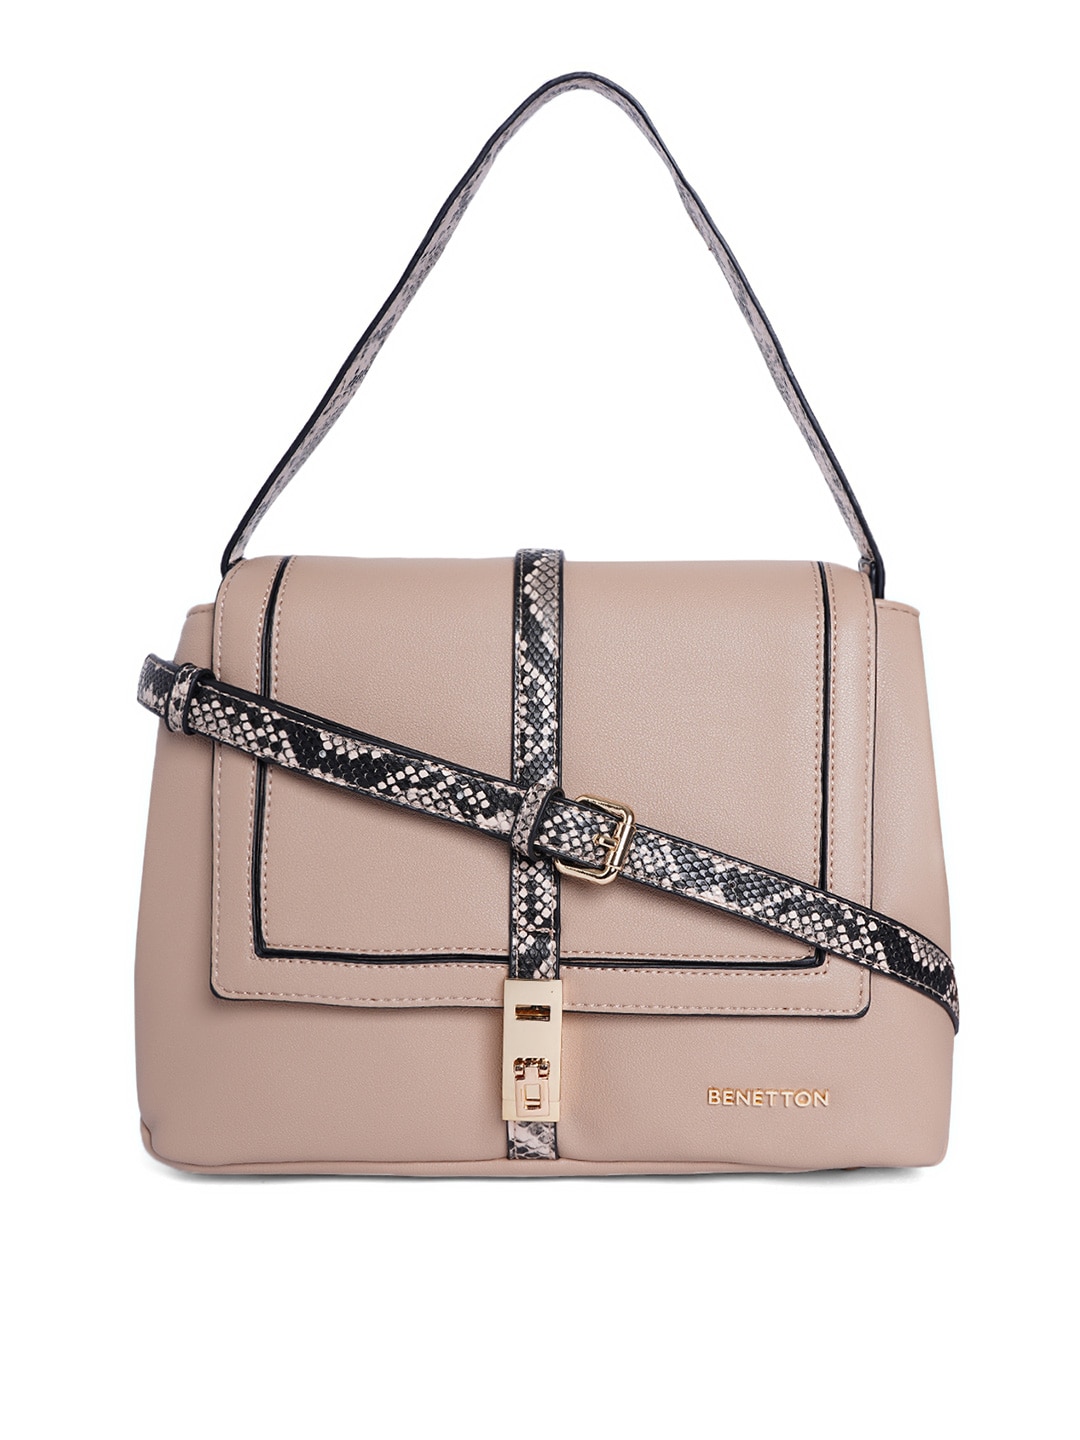 United Colors of Benetton Beige Structured Sling Bag Price in India